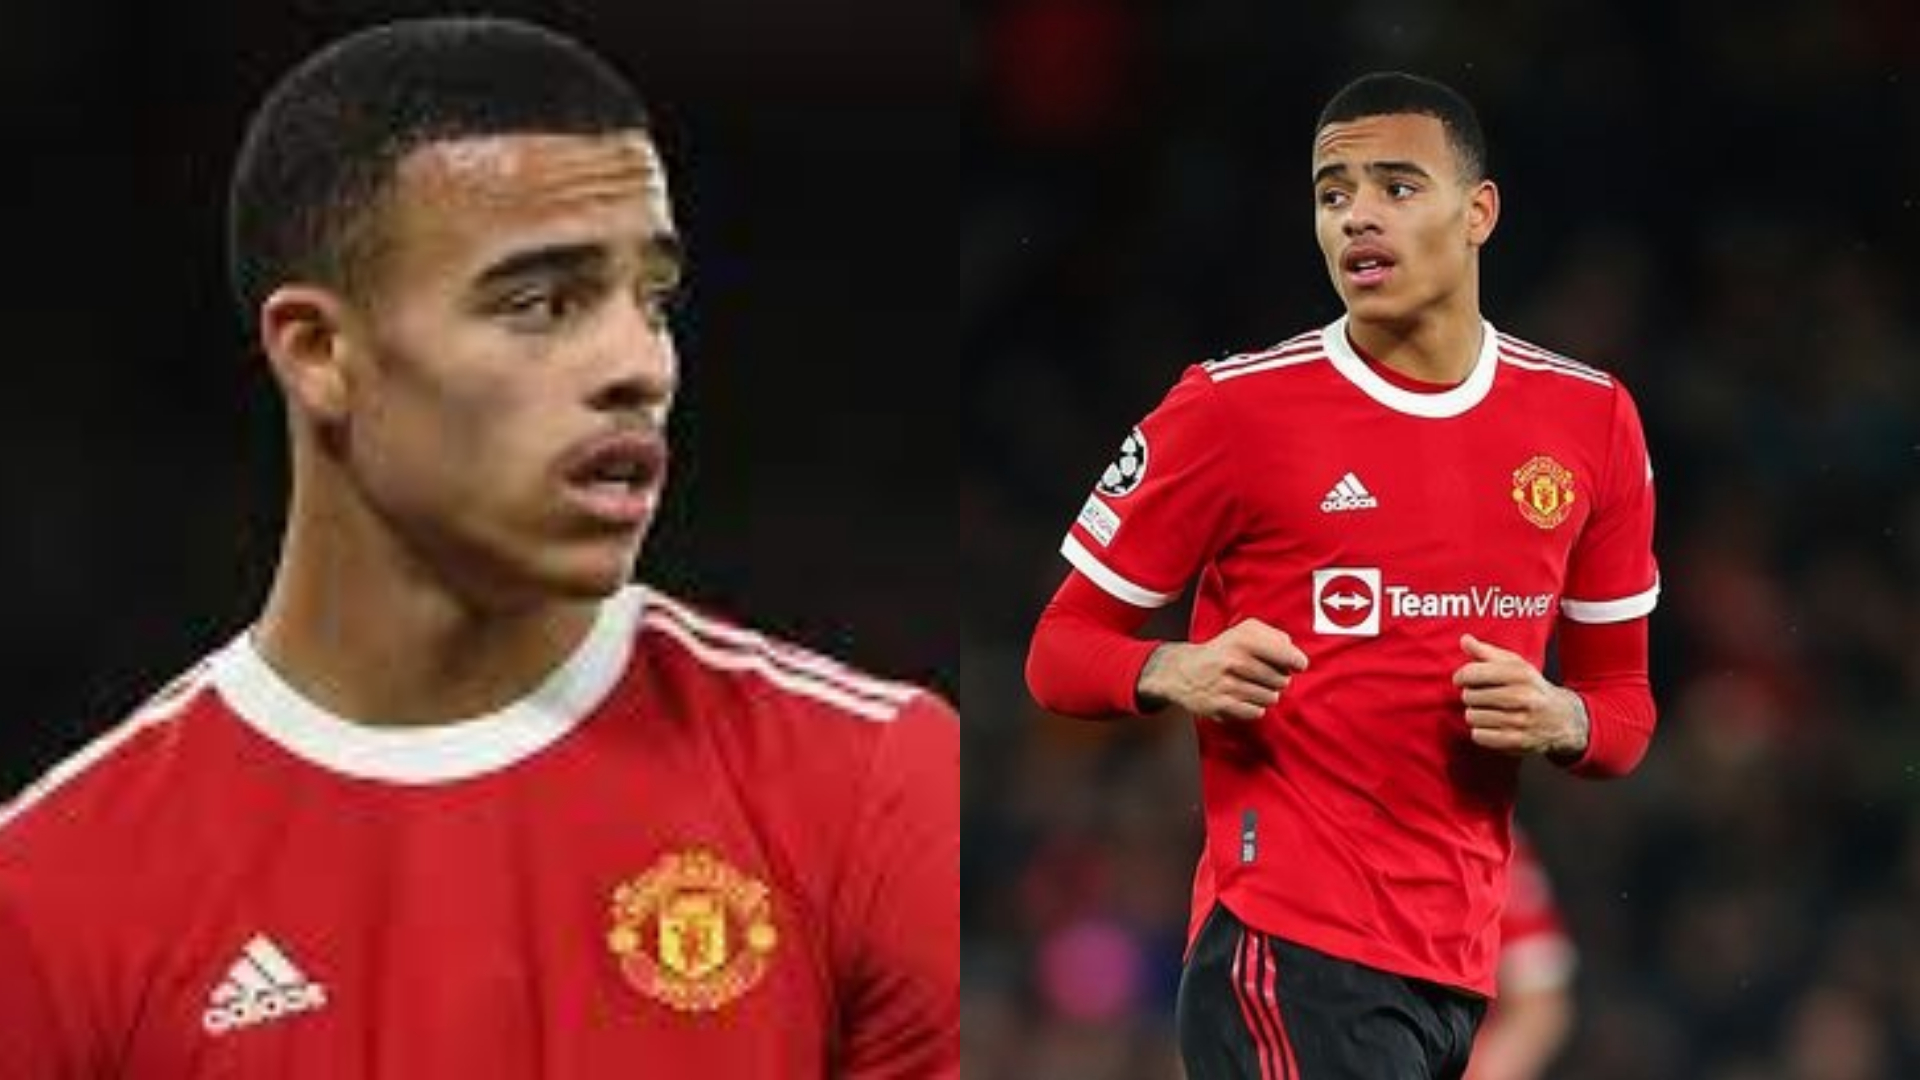 Suspended Manchester United Forward Mason Greenwood Returns to Training Following Arrest